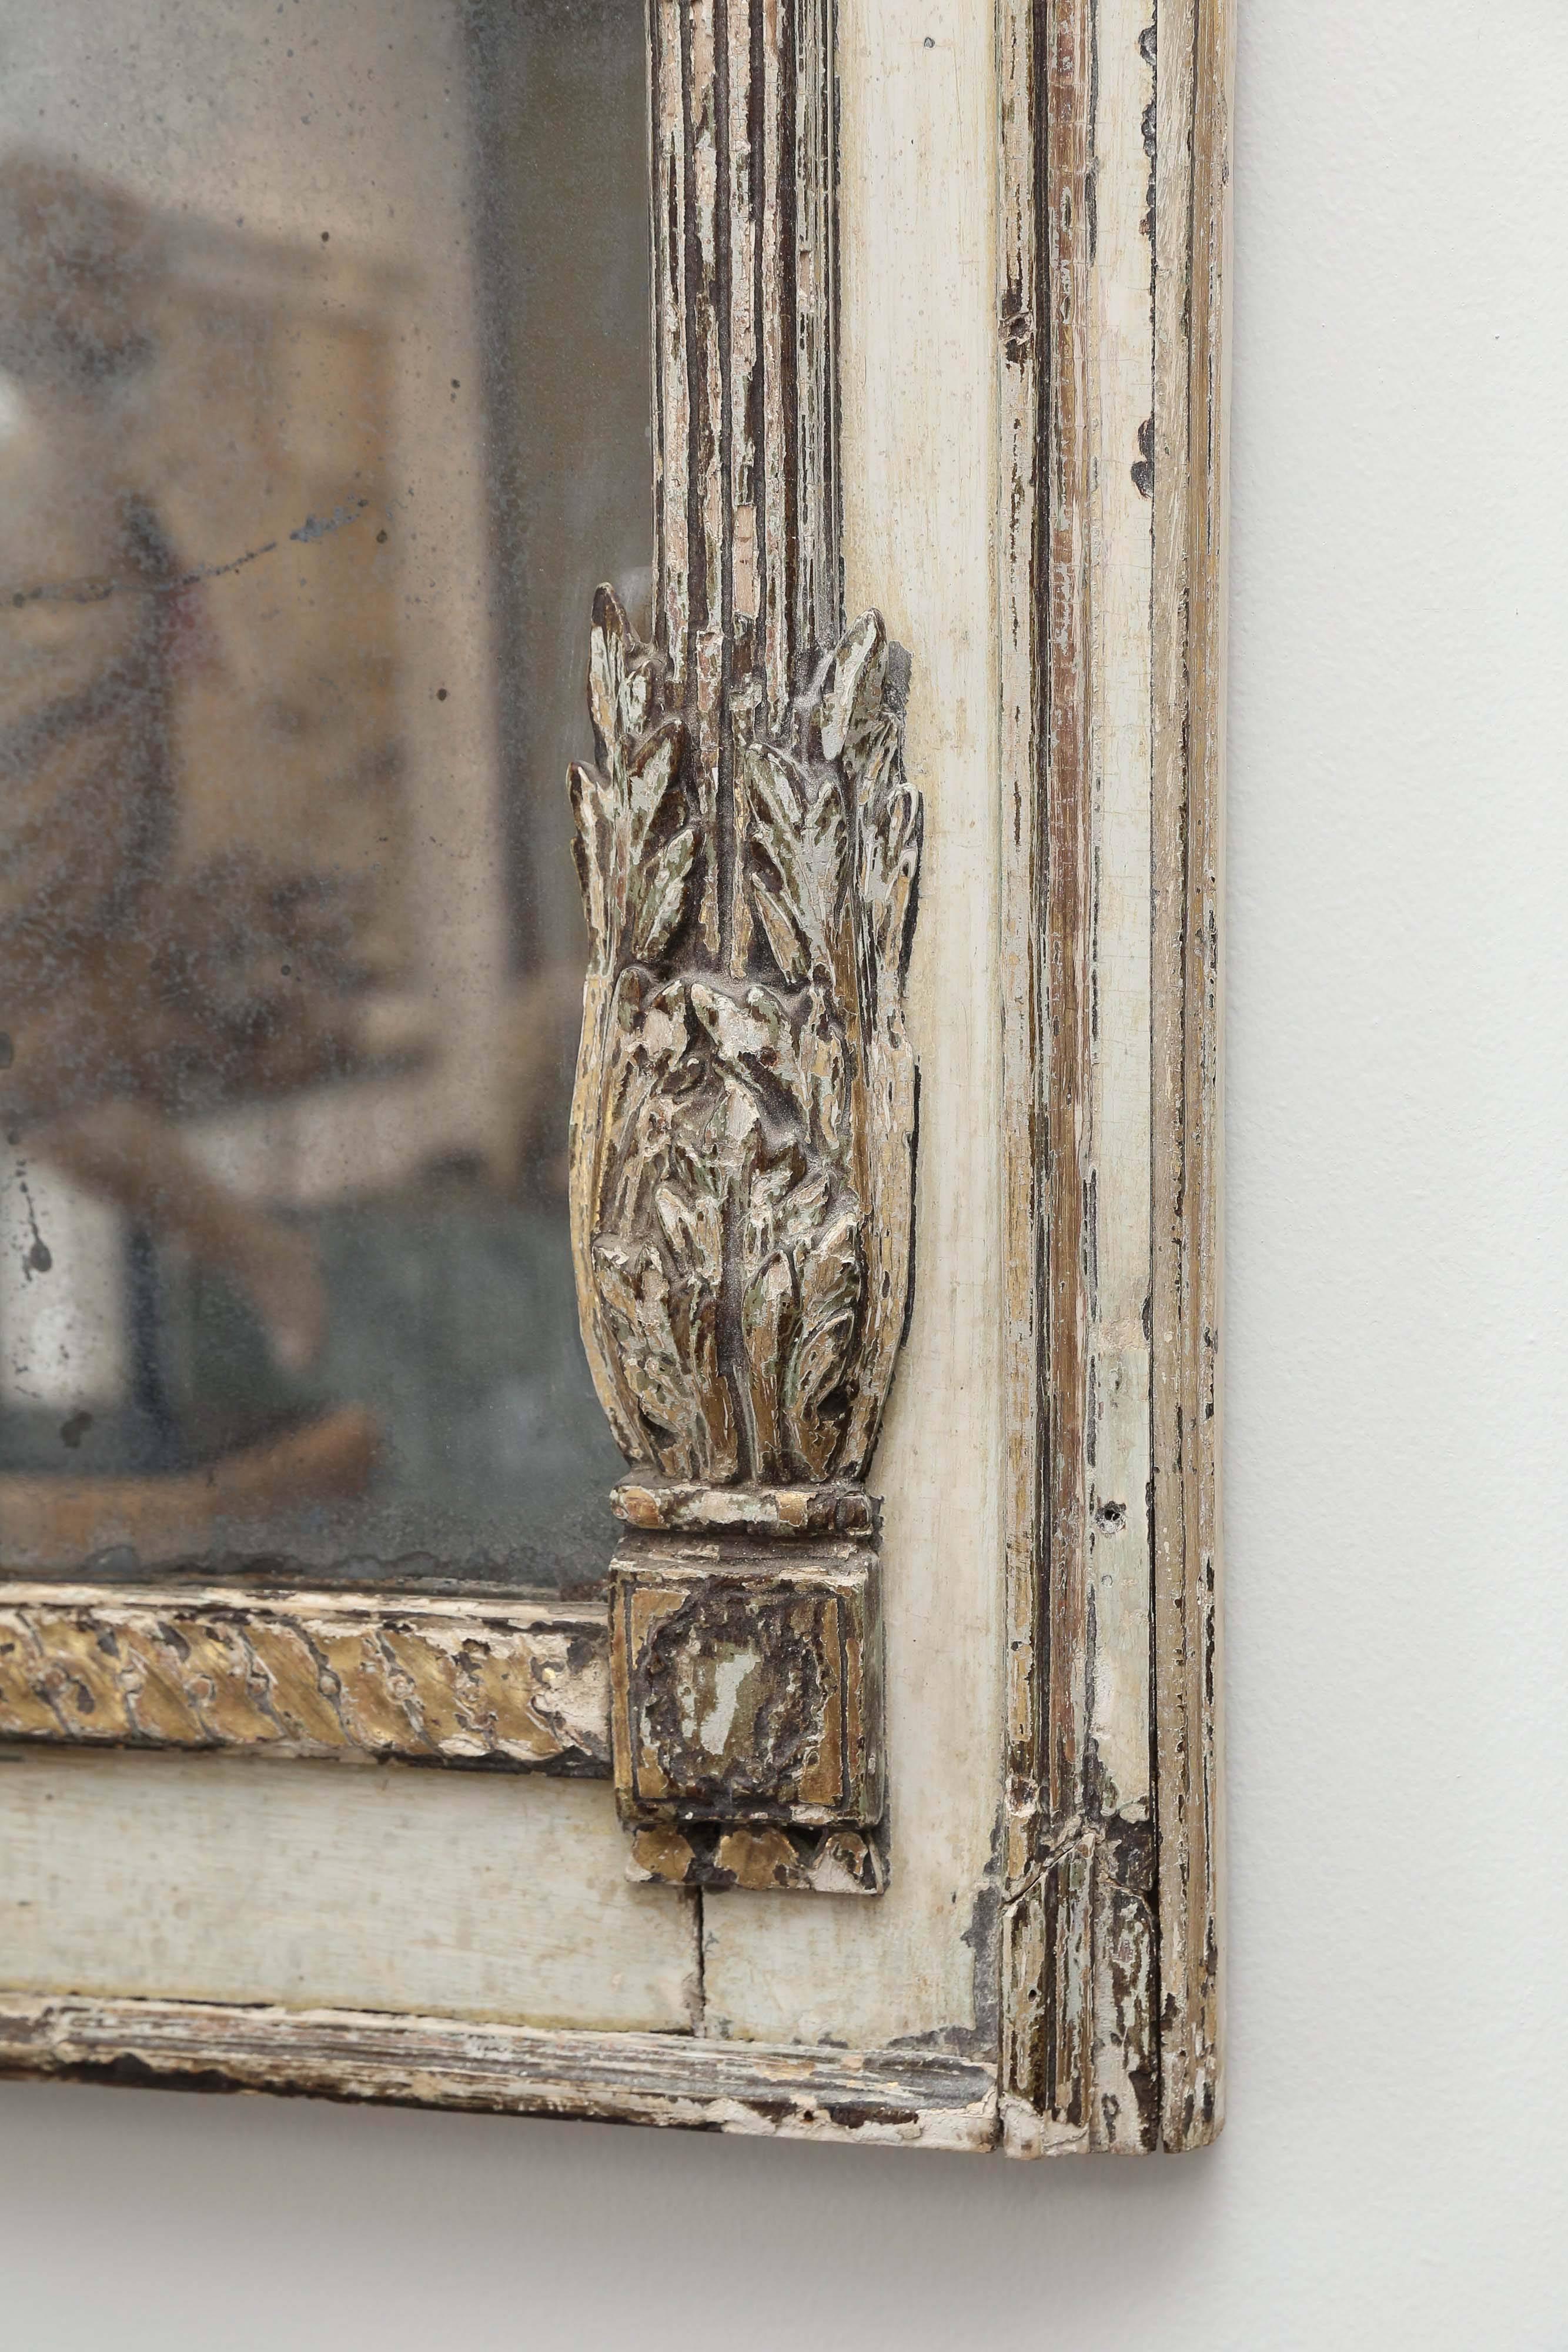 19th century French Trumeau with traces of gilt and silver throughout the carved wooden detail. The mirror's frame is flanked by two reeded columns with pineapple like finials at the top and a swag detail below the columns' capitals. At the opposite